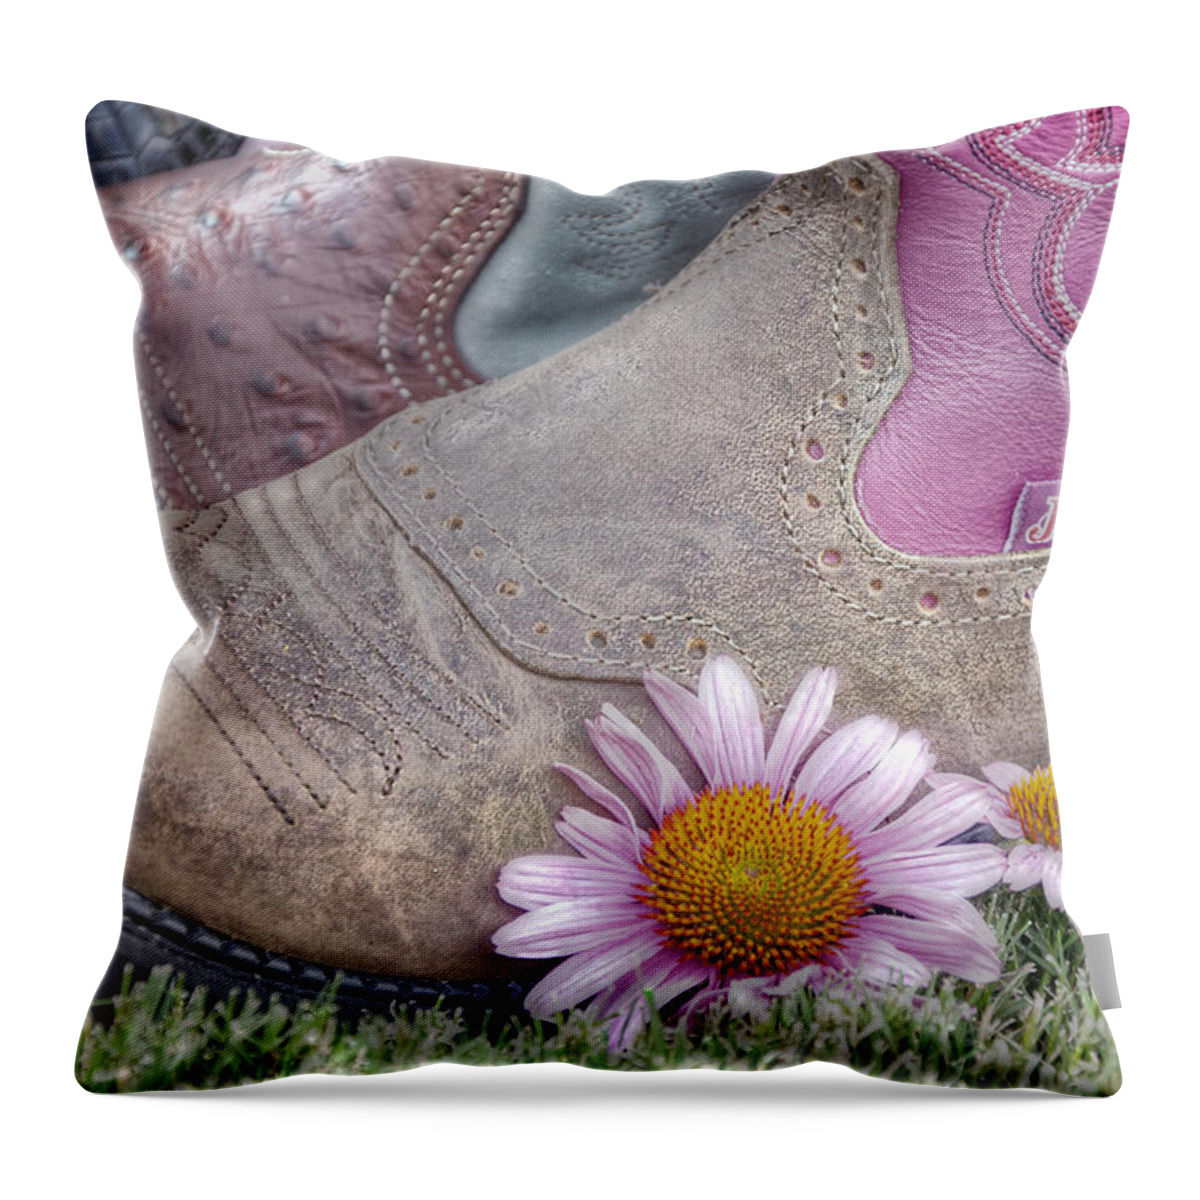 Clothing Throw Pillow featuring the photograph Megaboots by Joan Carroll